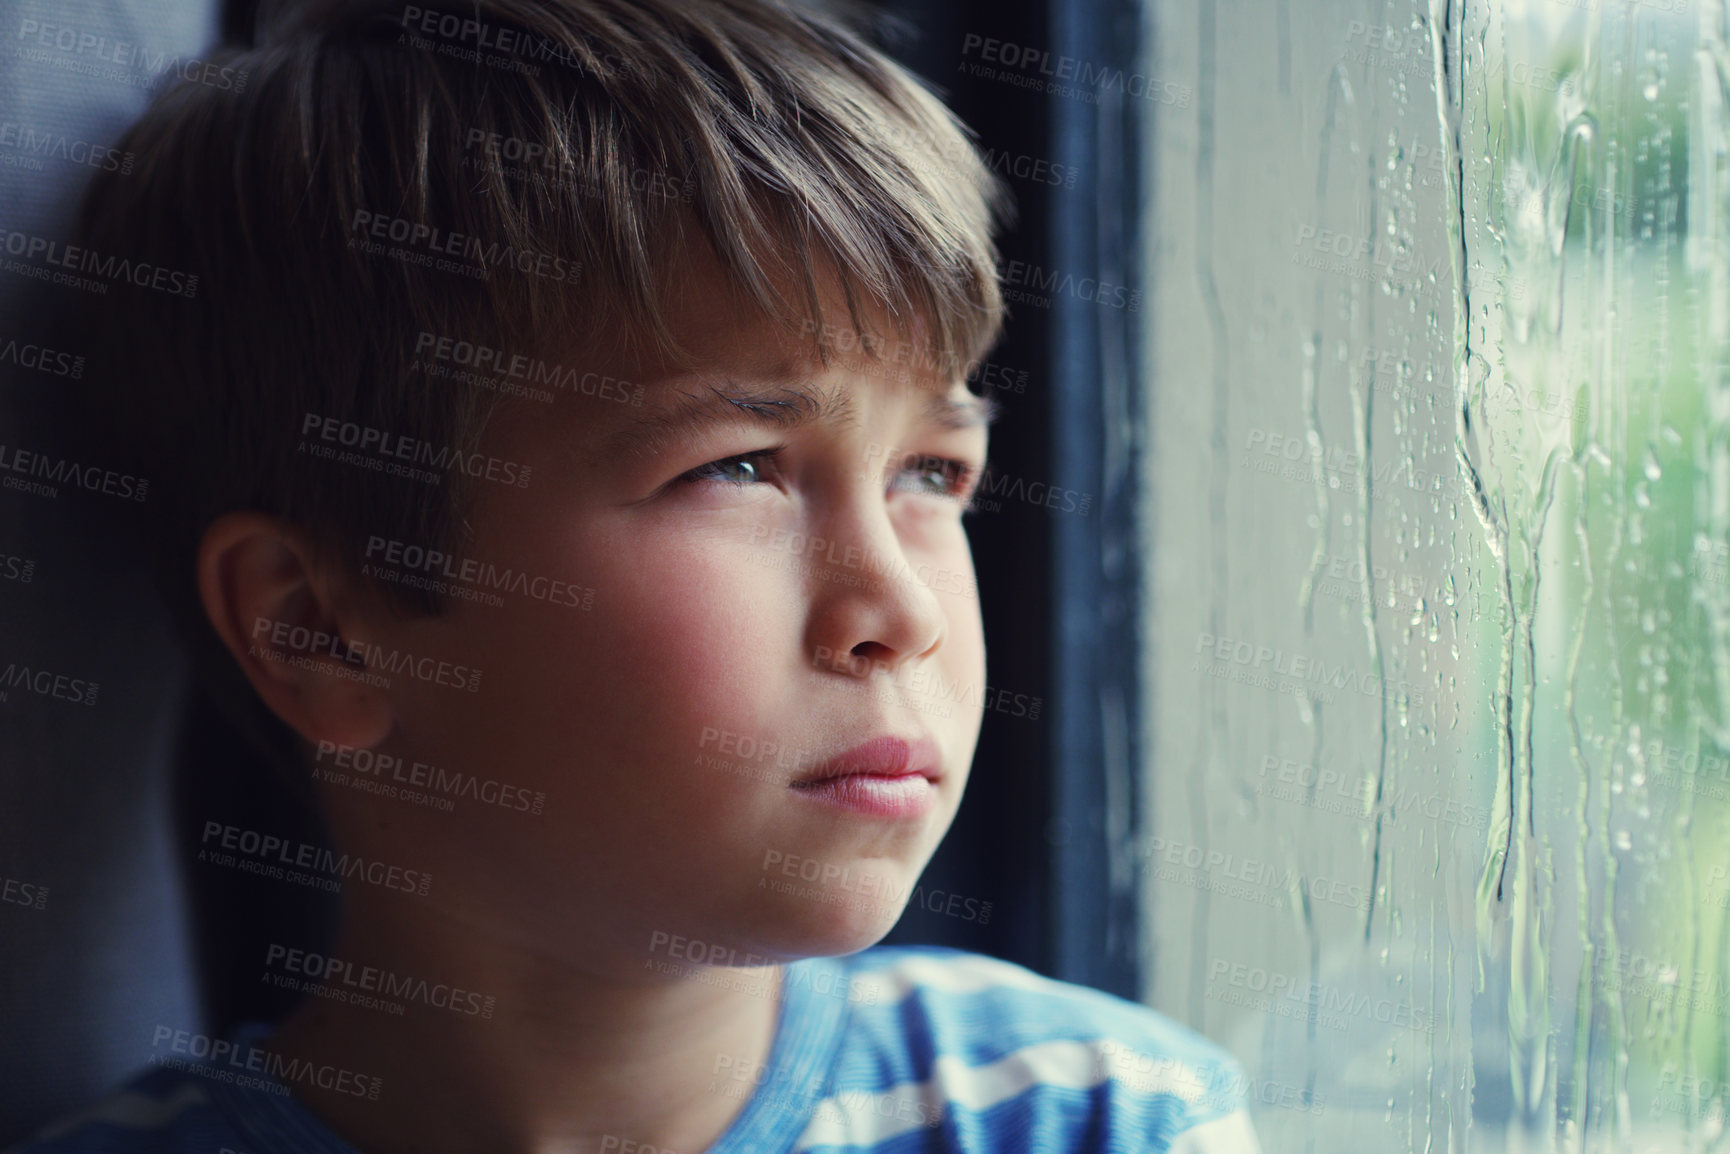 Buy stock photo Shot of a sad young boy watching the rain through a window at home